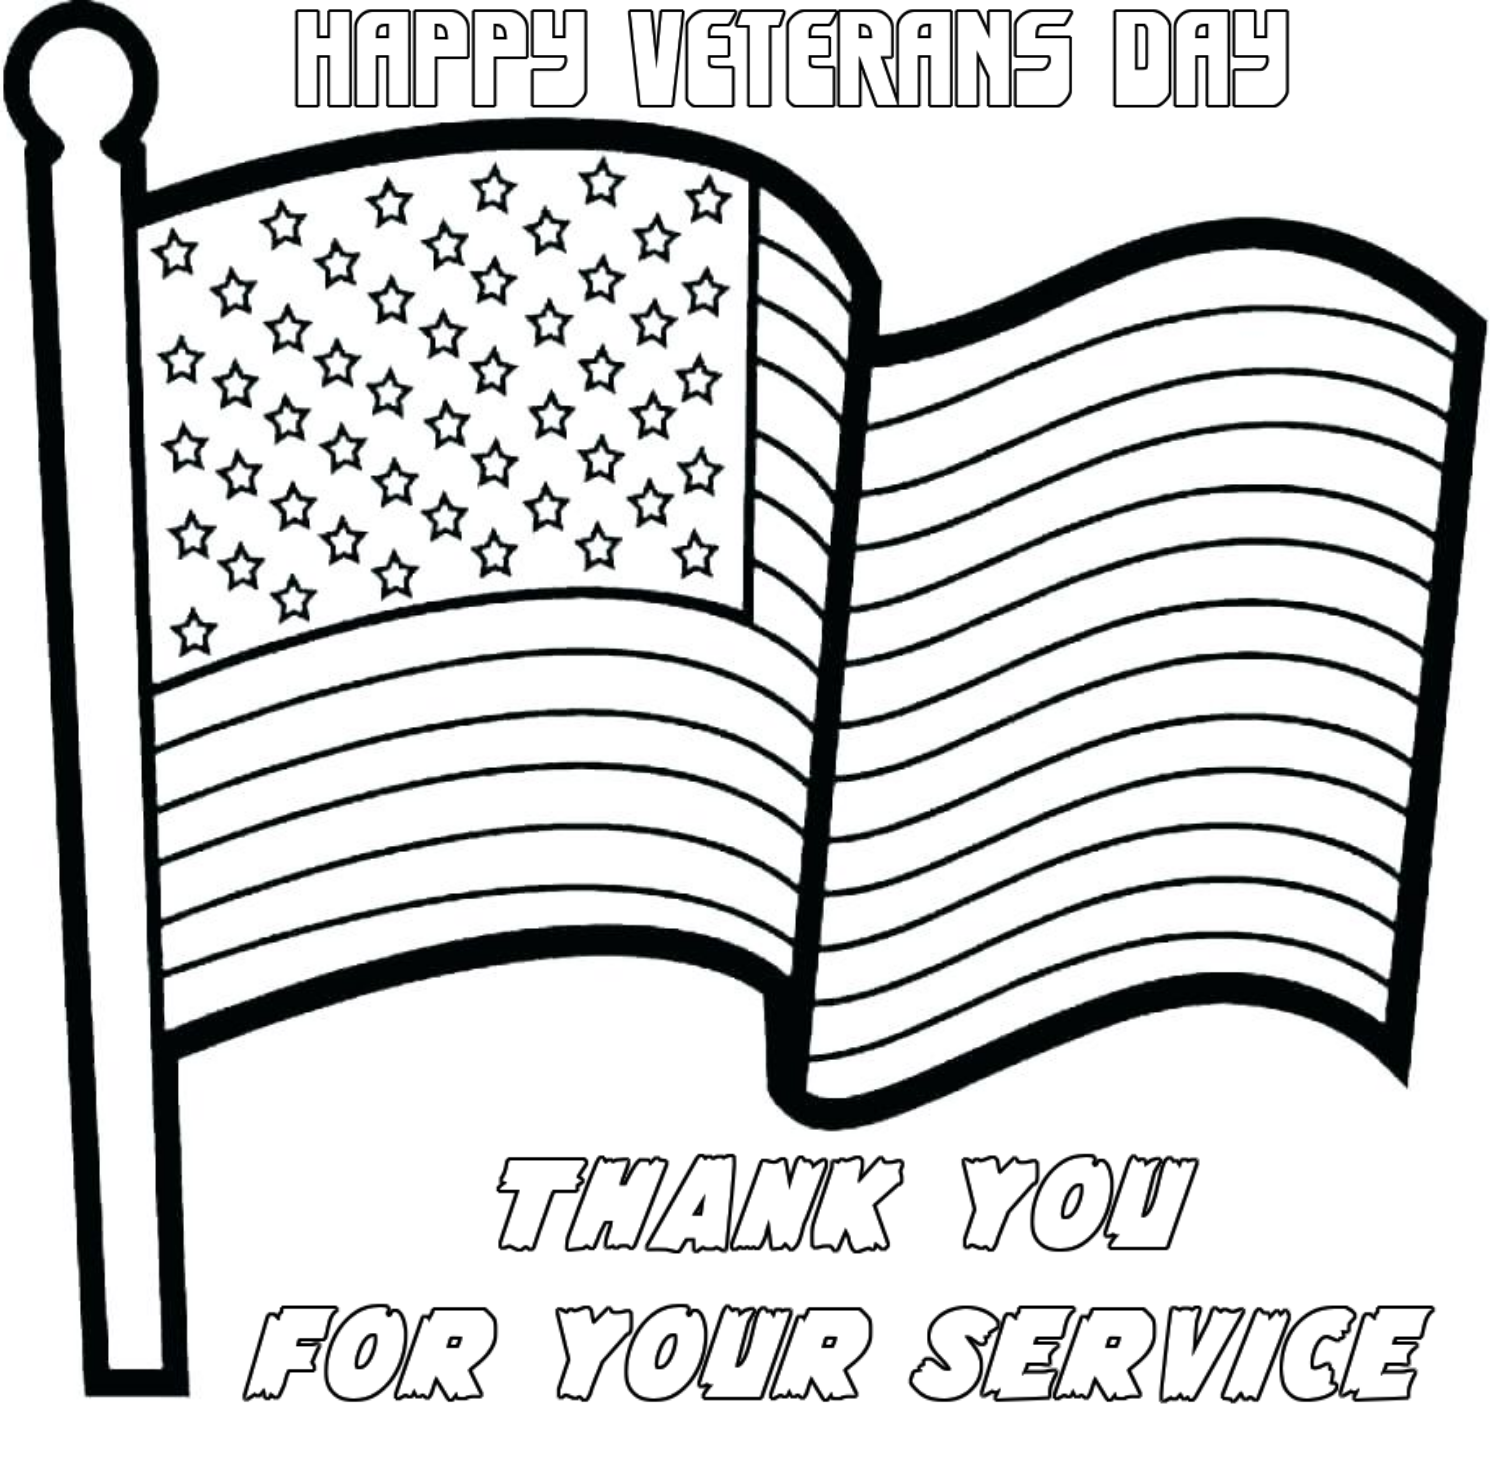 Veterans Day U.S Flag coloring pages free and printable